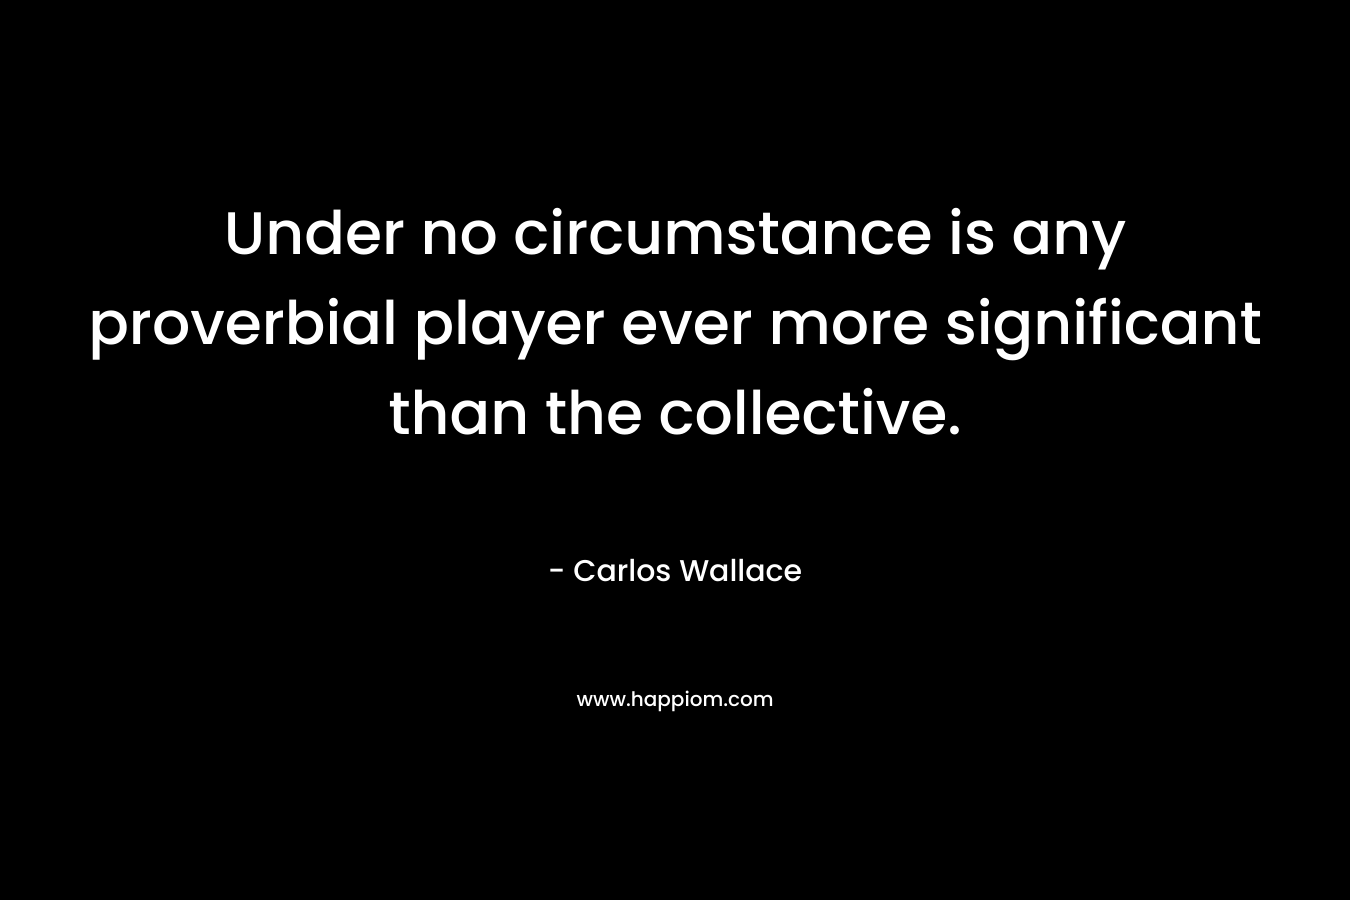 Under no circumstance is any proverbial player ever more significant than the collective.